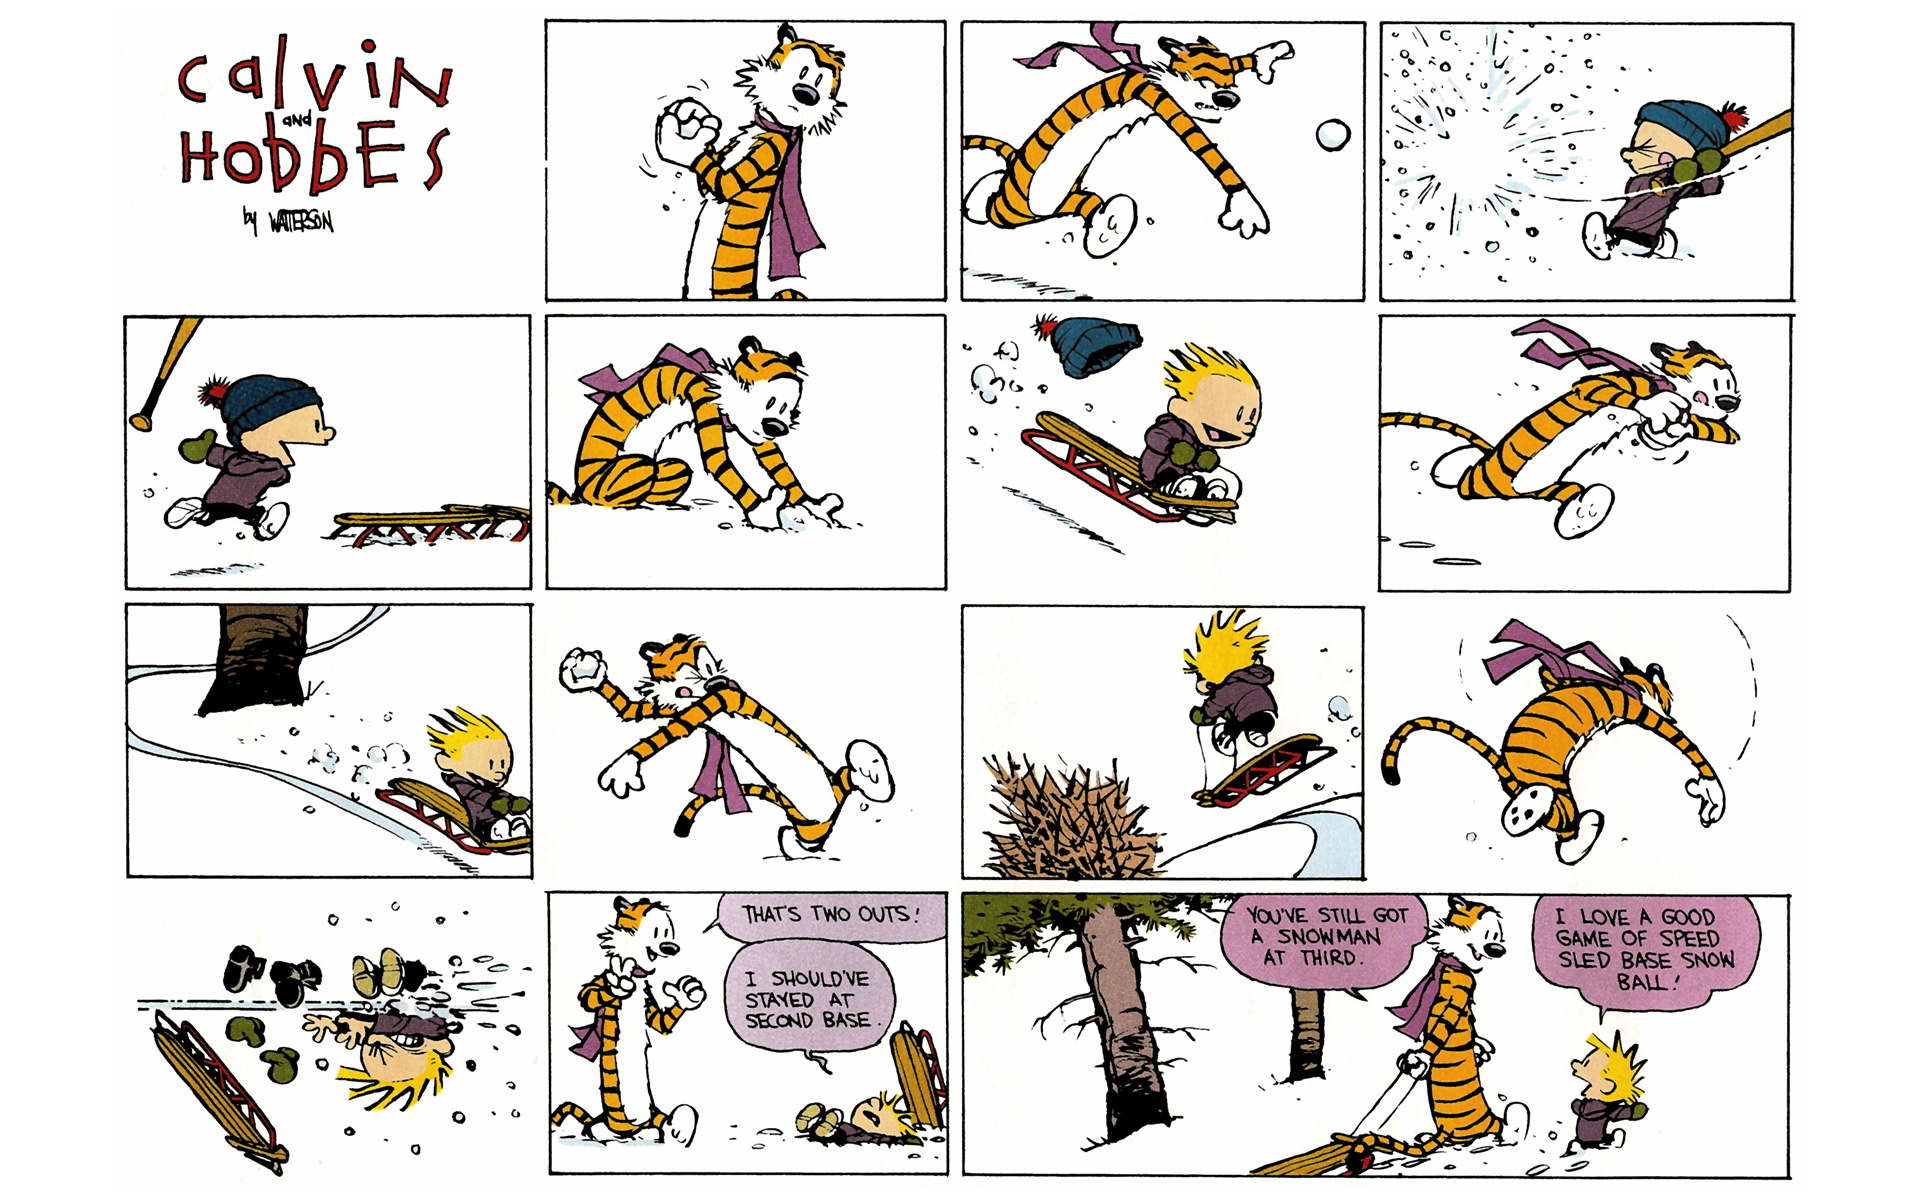 Read online Calvin and Hobbes comic - Issue #10 - 62.